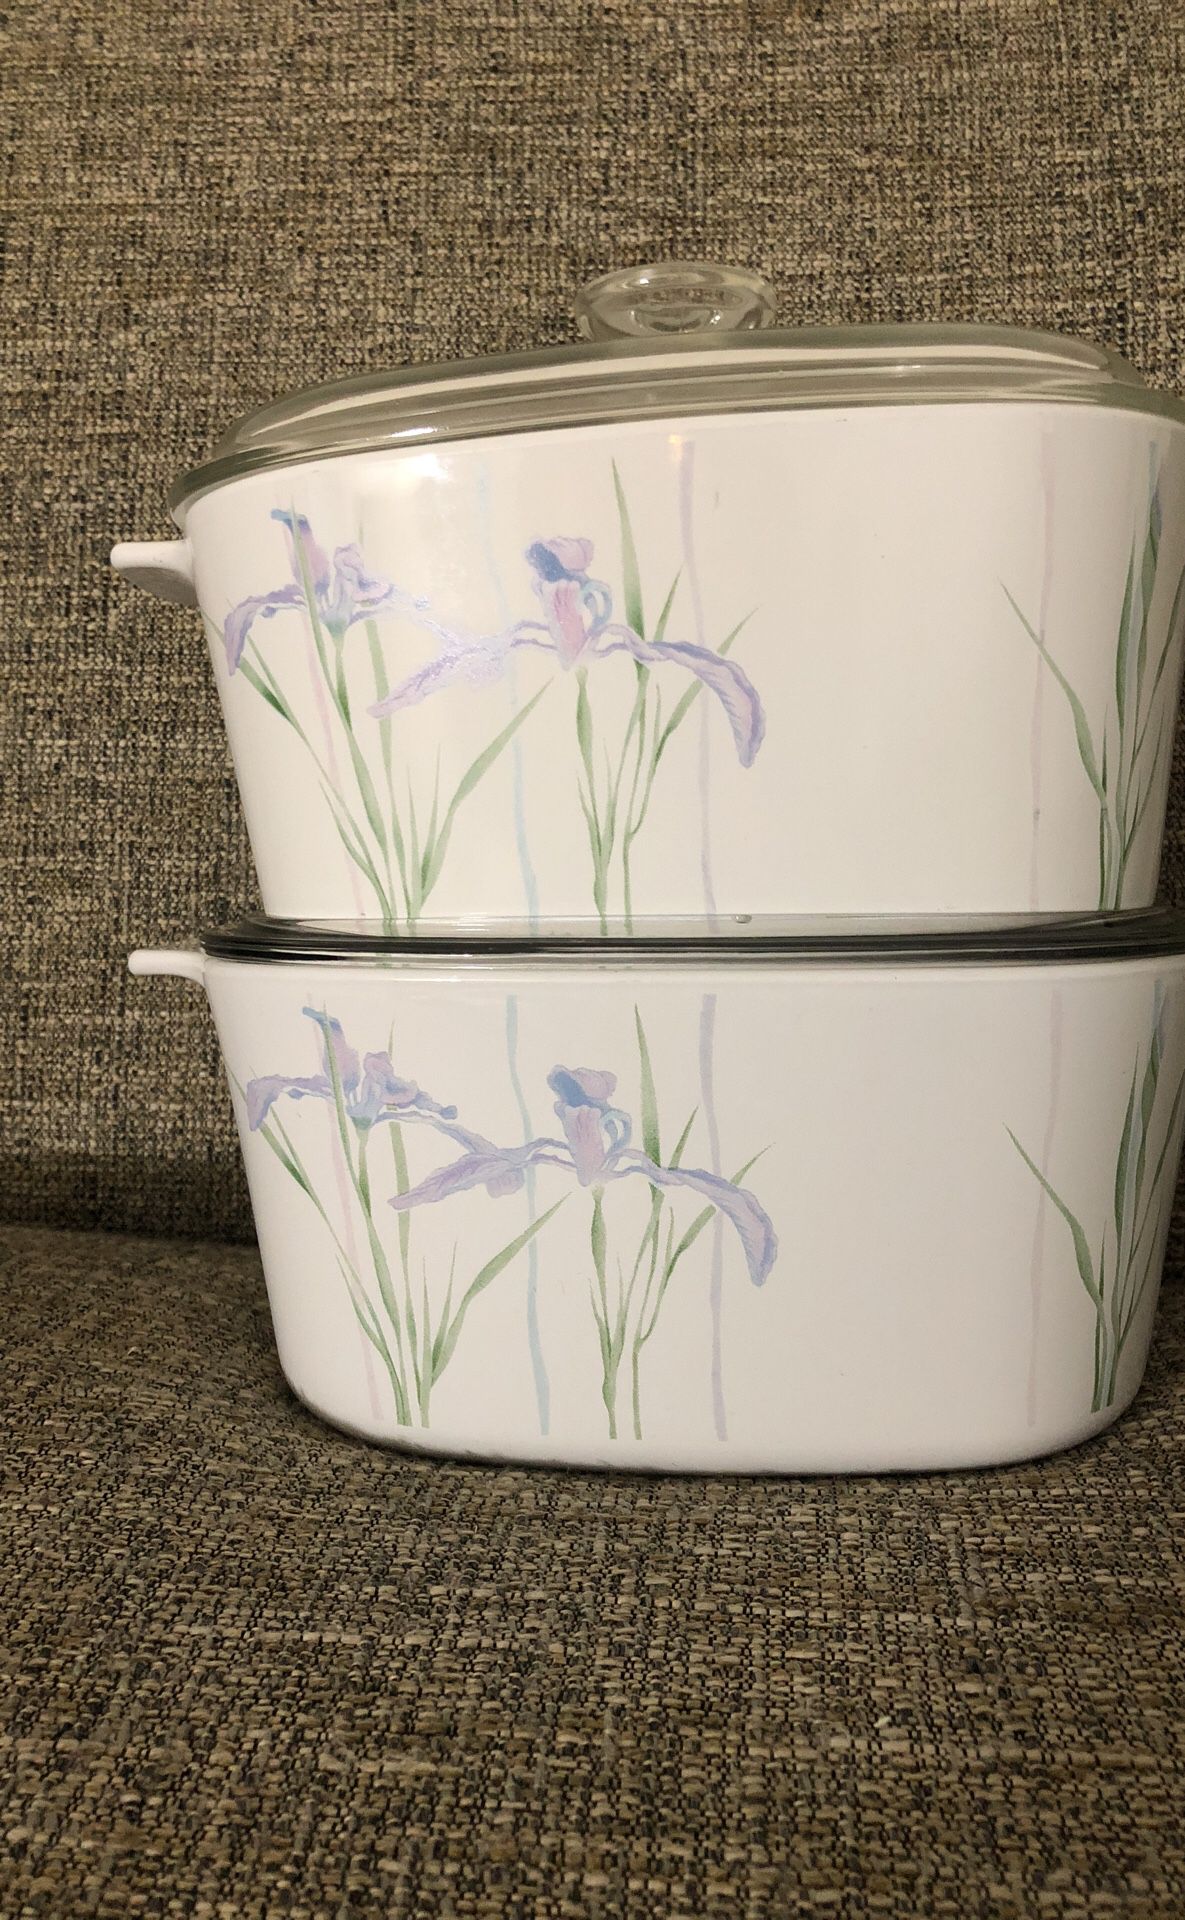 Set of 2 Corning Ware with Pyrex lid. Please see all the pictures and read the description